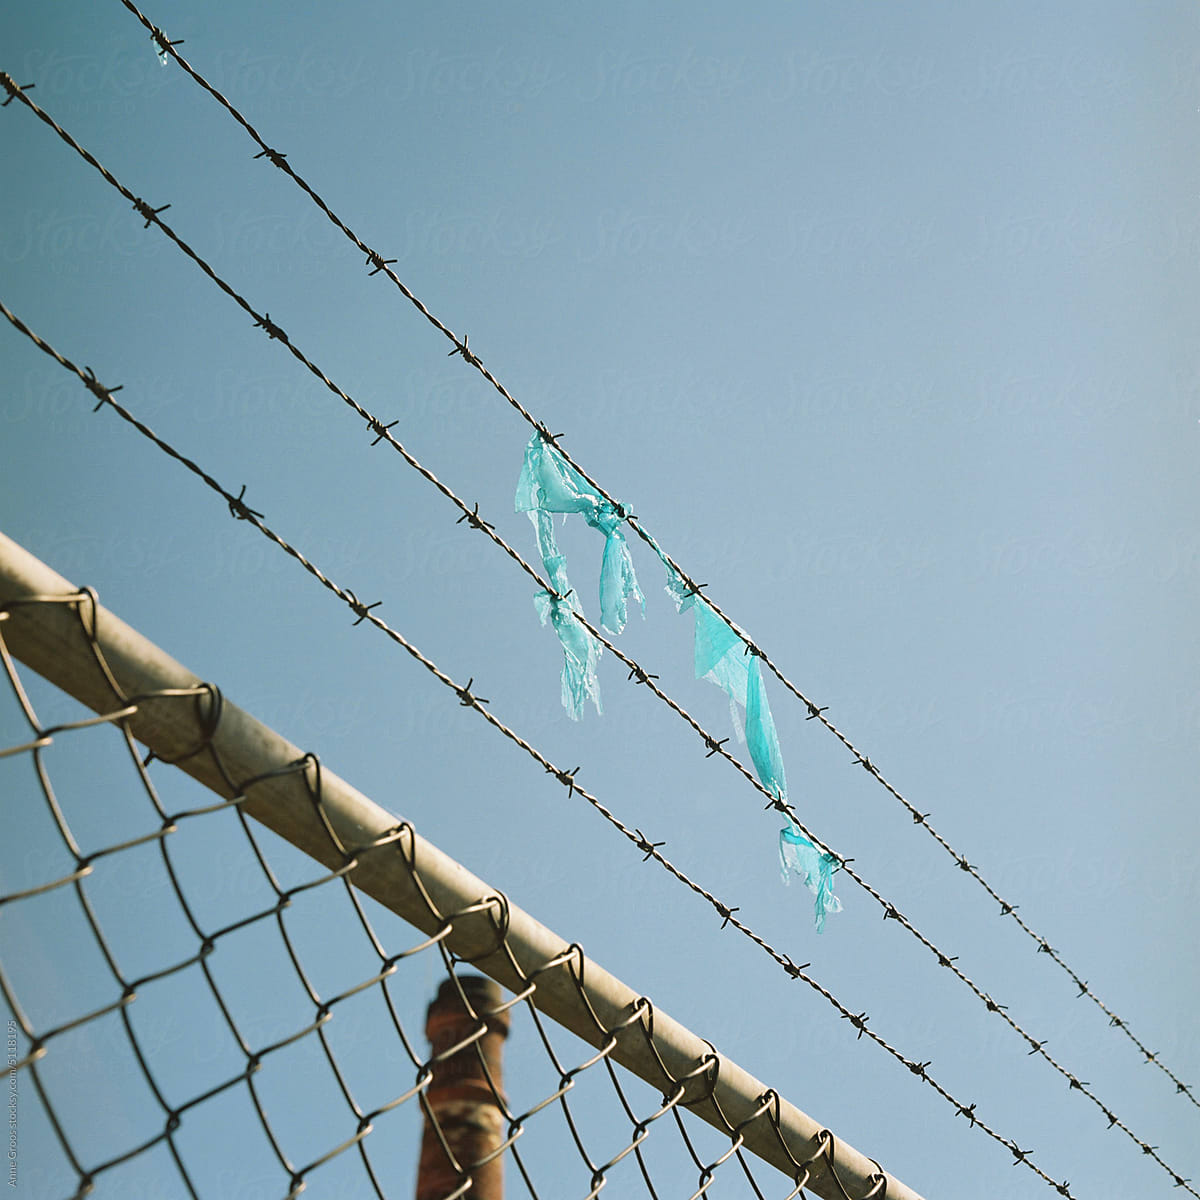 Plastic stuck in barbed wire